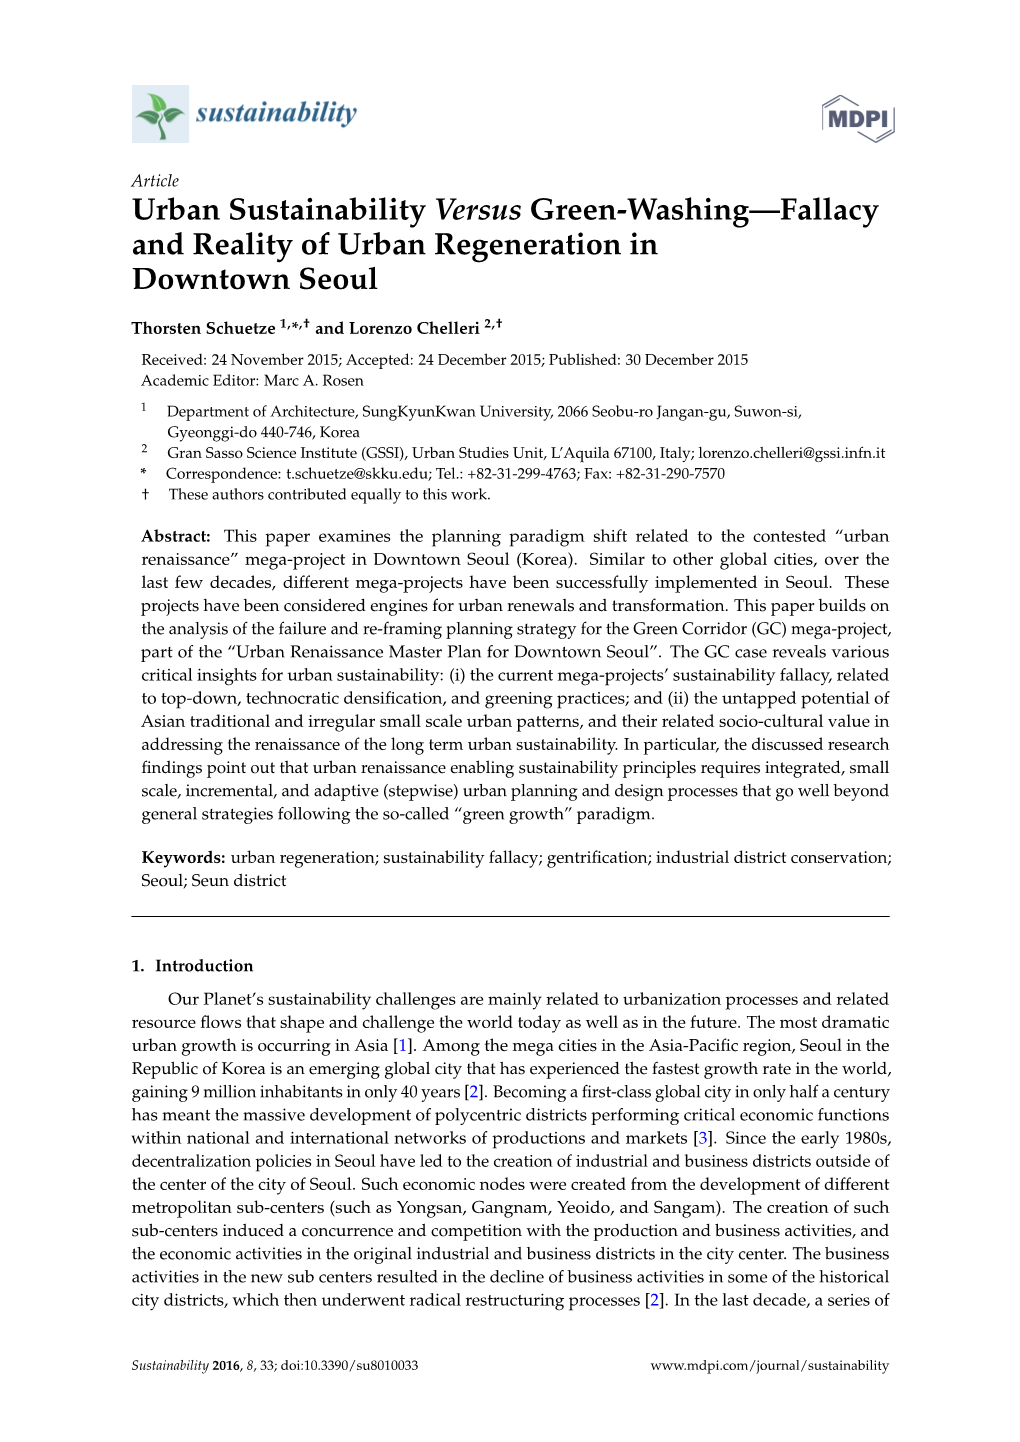 Urban Sustainability Versus Green-Washing—Fallacy and Reality of Urban Regeneration in Downtown Seoul